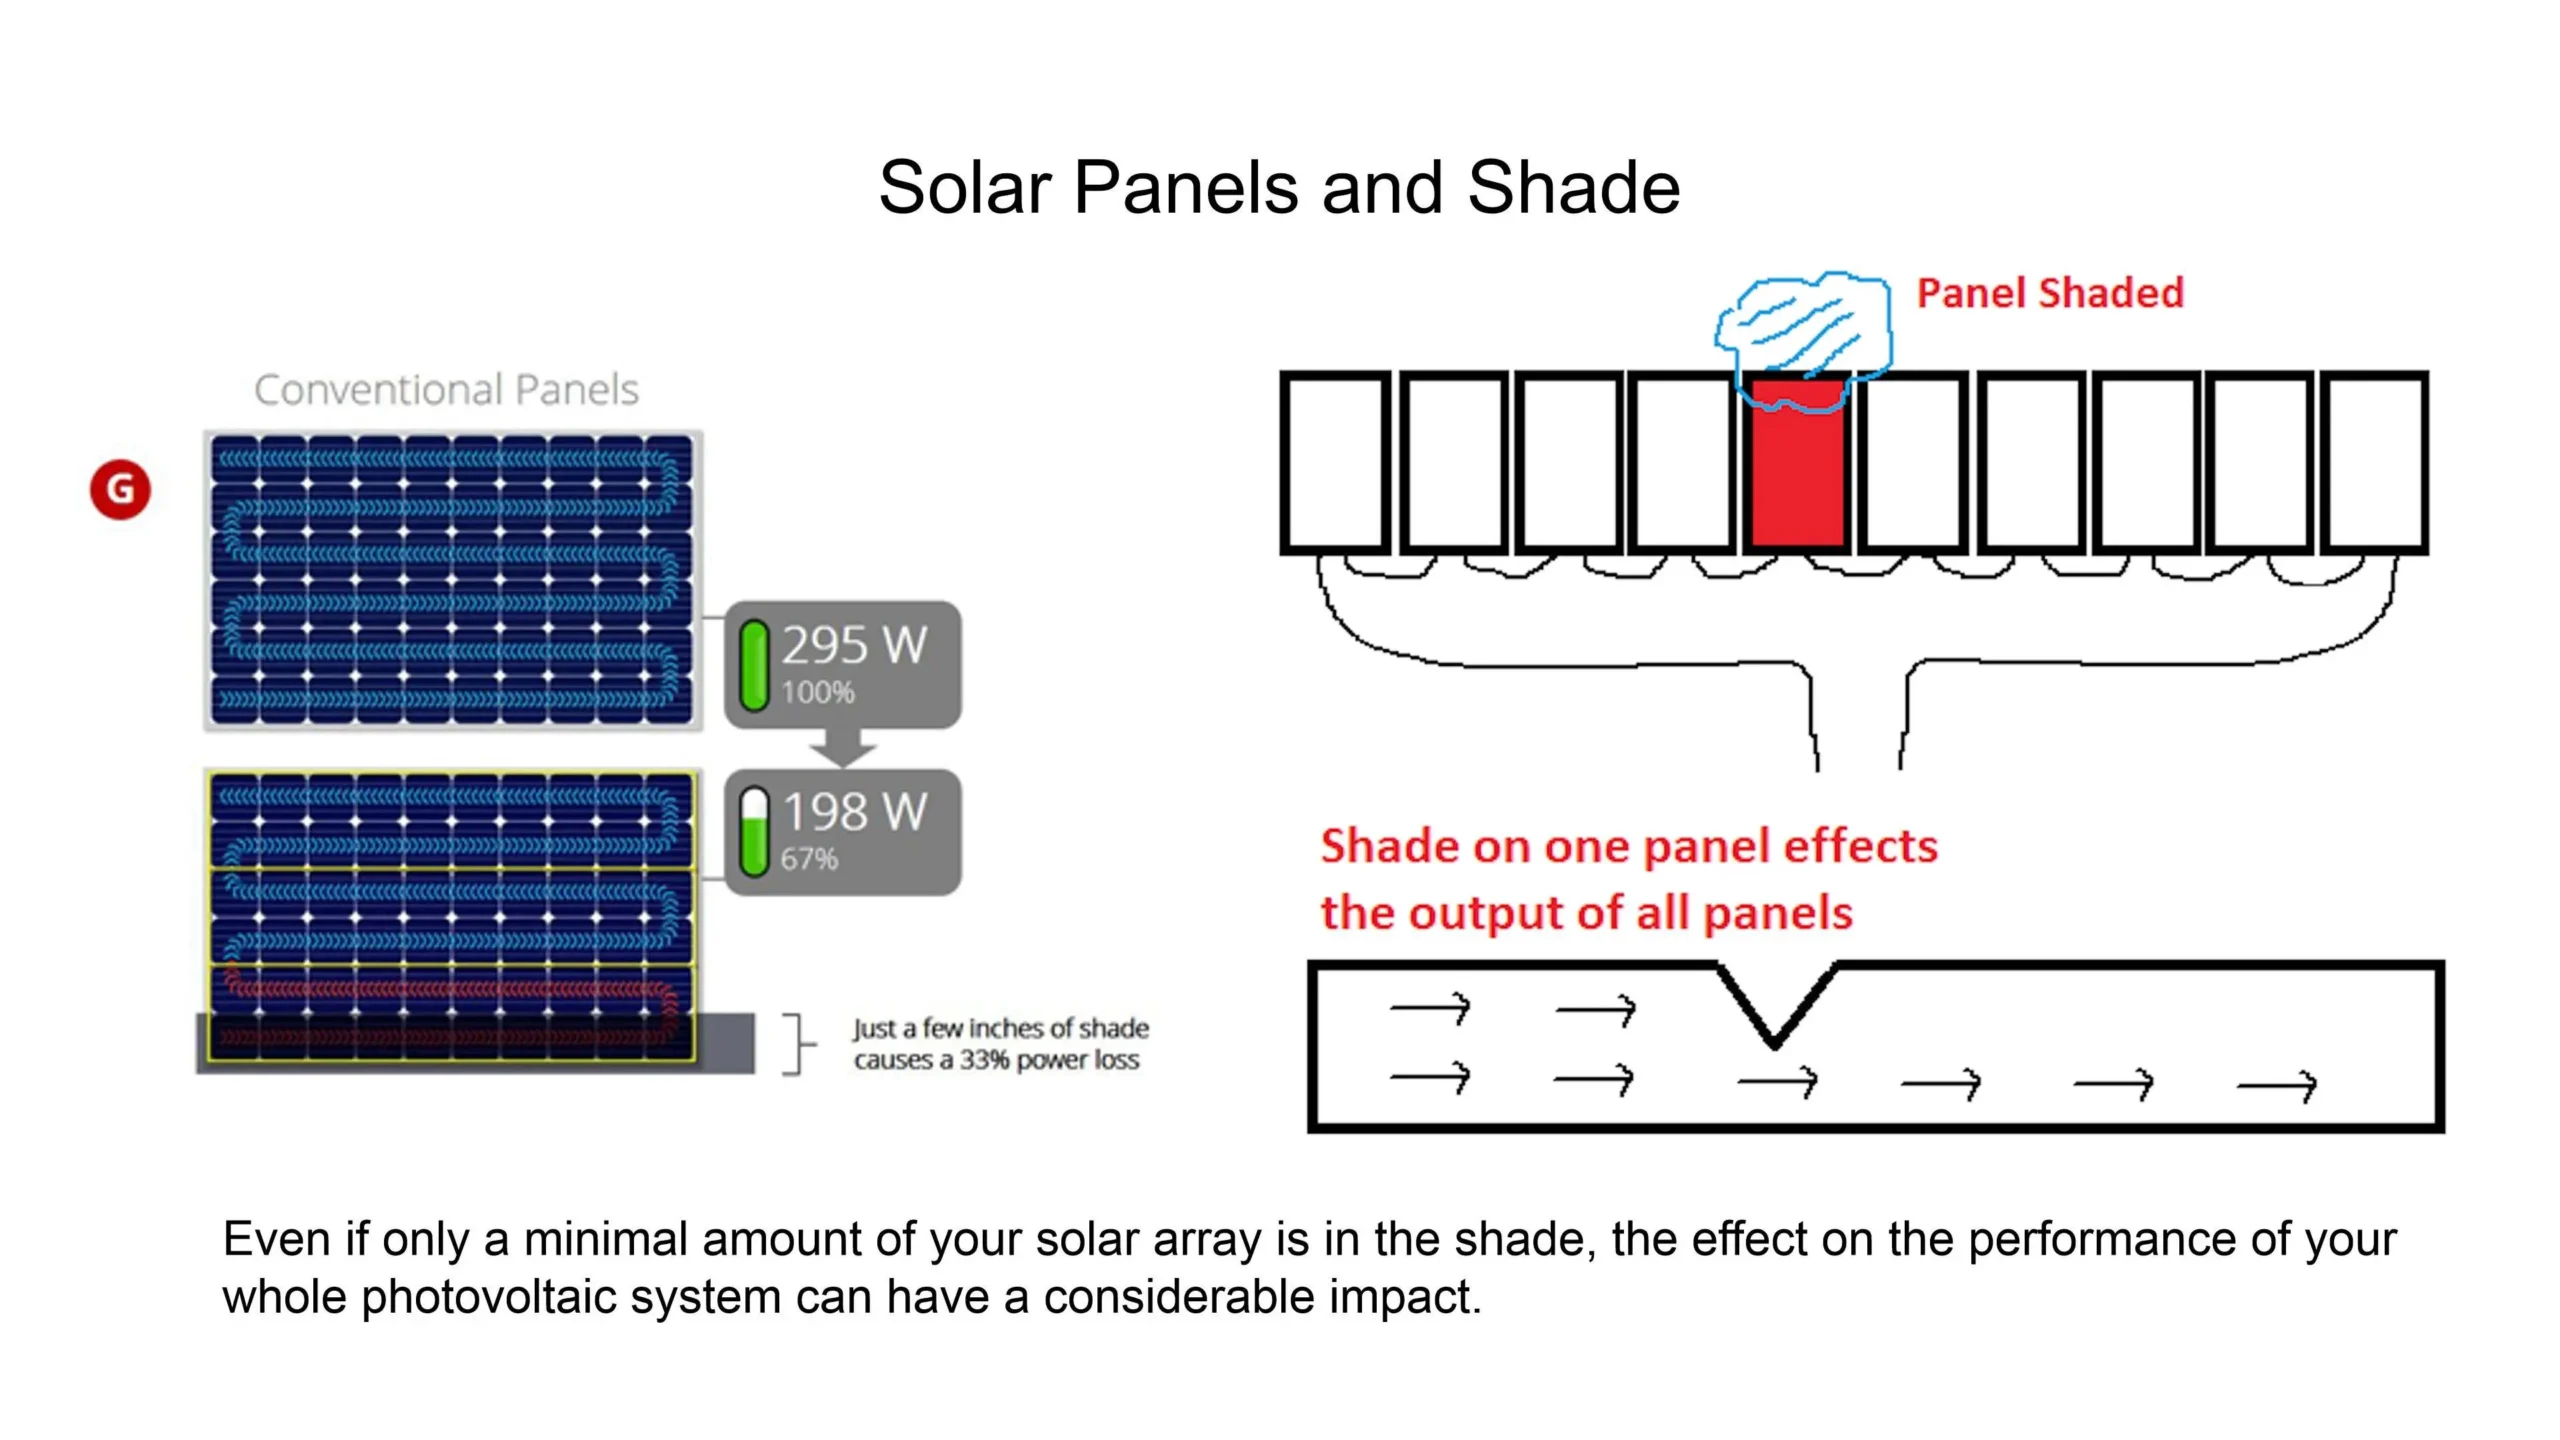 shadow effect on solar panels - What is the effect of shading